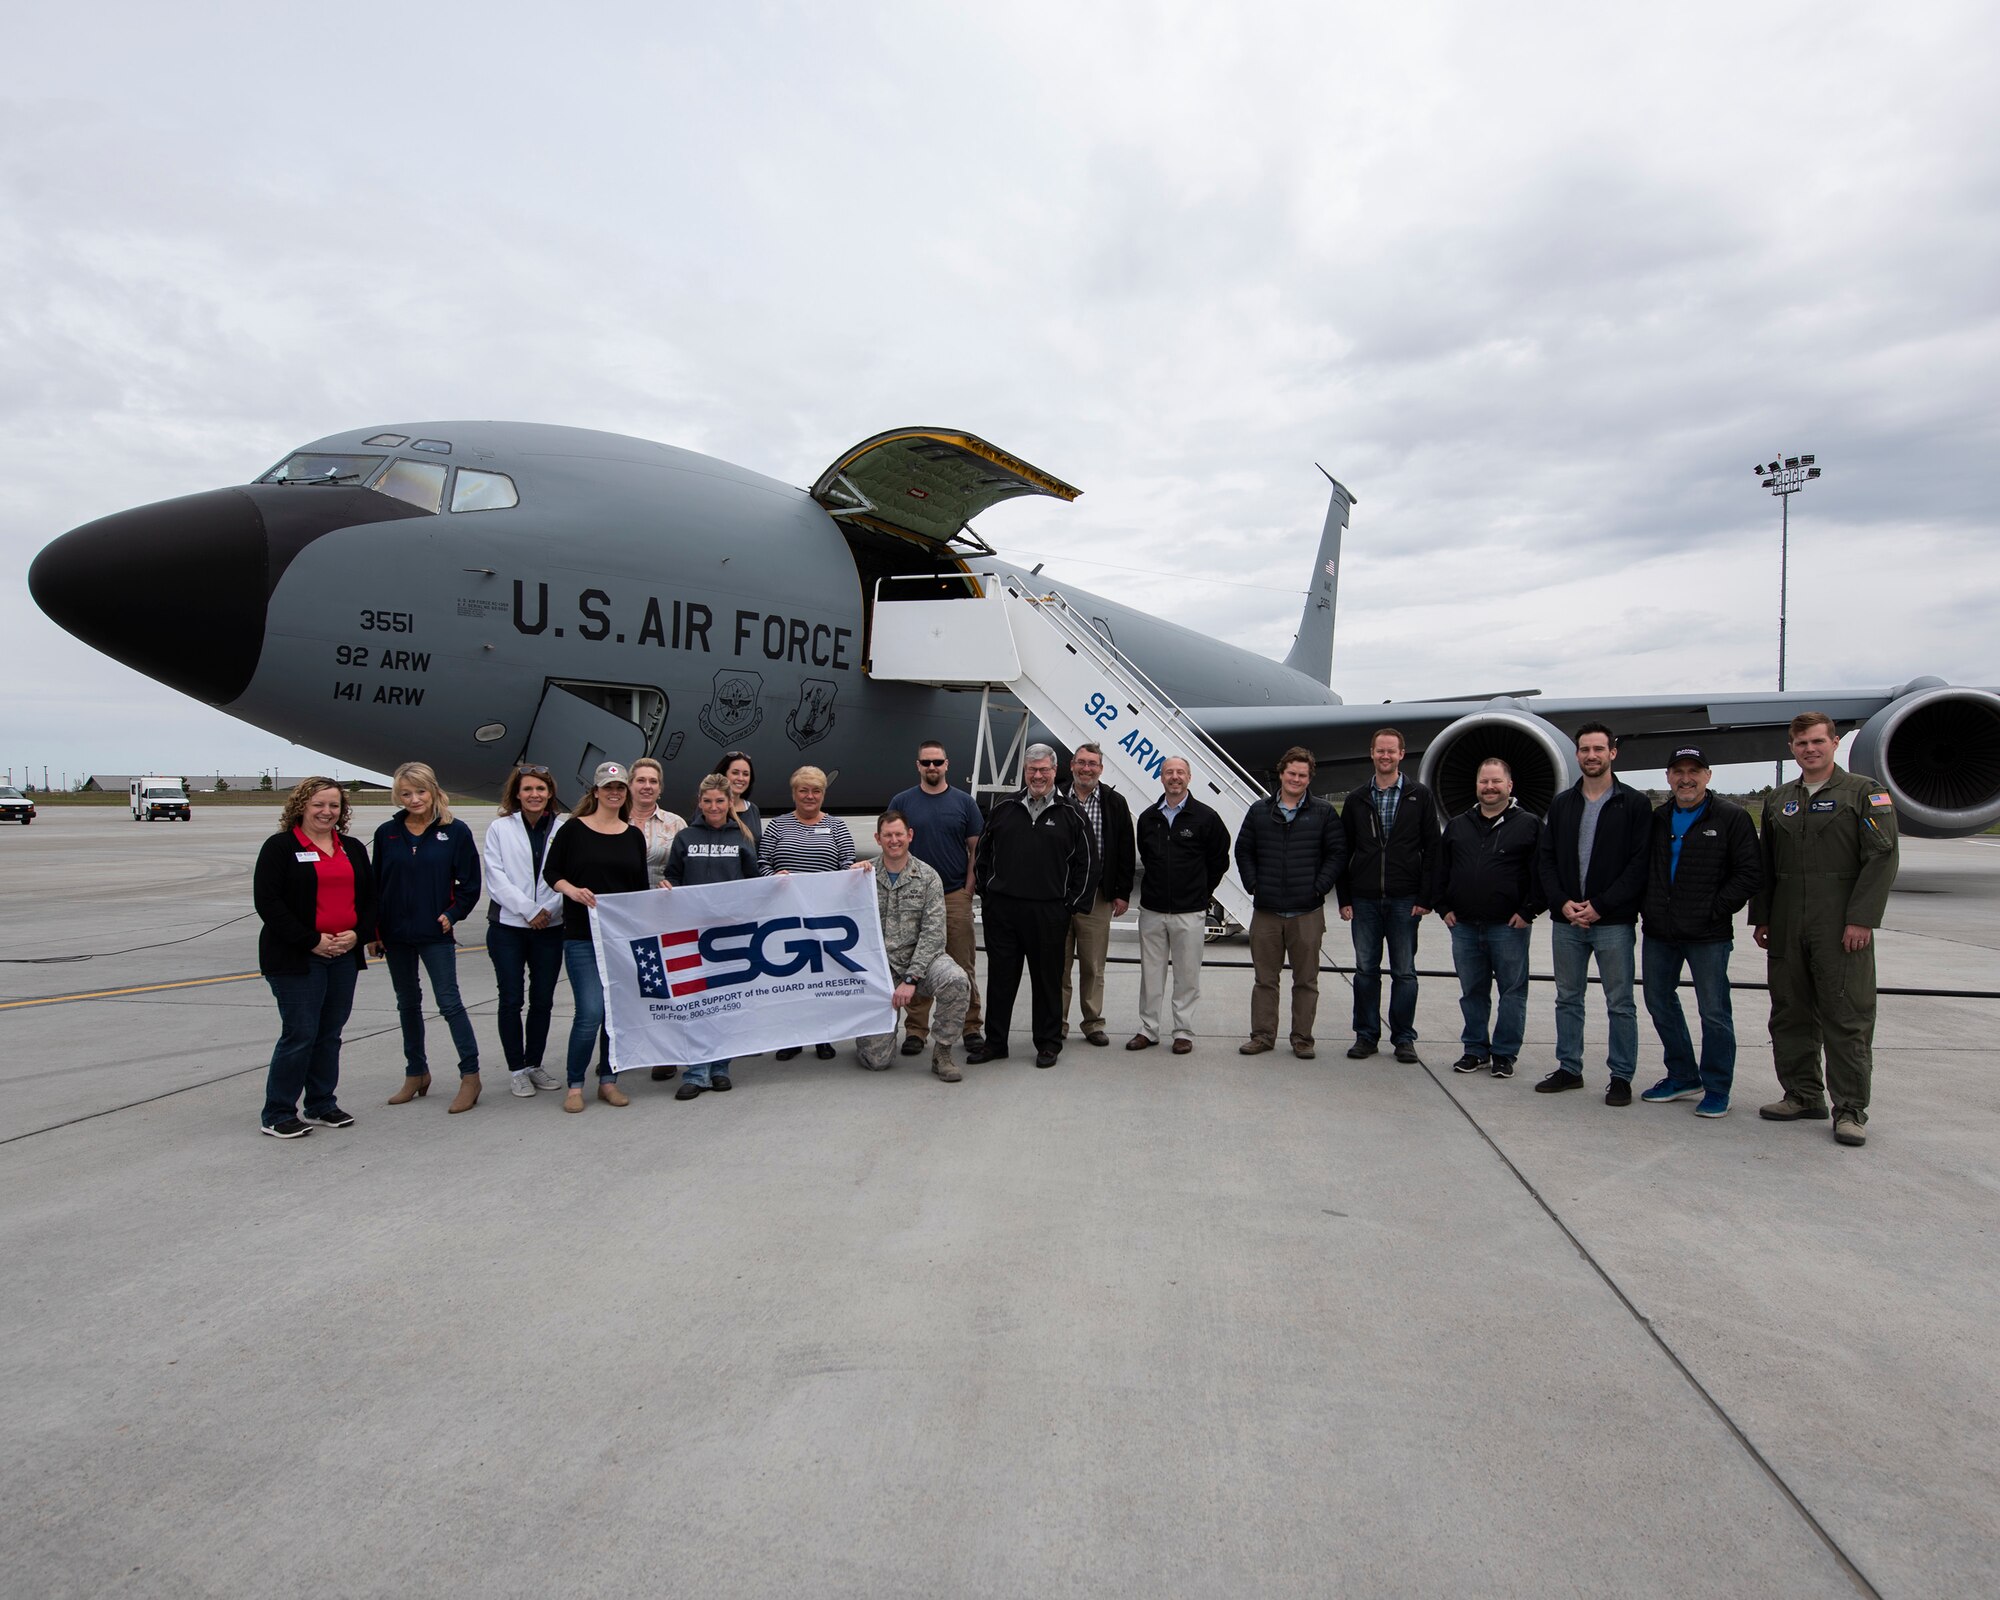 Employers participating in the Employer Support of the Guard and Reserve “Boss Lift” event pose in front of a KC-135 Stratotanker prior to boarding May 5, 2018 at Fairchild Air Force Base, Wash. The group had the opportunity to watch a refueling mission for F-15C Eagle’s from Klamath Falls, Ore. over southern Oregon and to learn about the mission of the 141st ARW. (U.S. Air National Guard photo by Staff Sgt. Rose M. Lust)